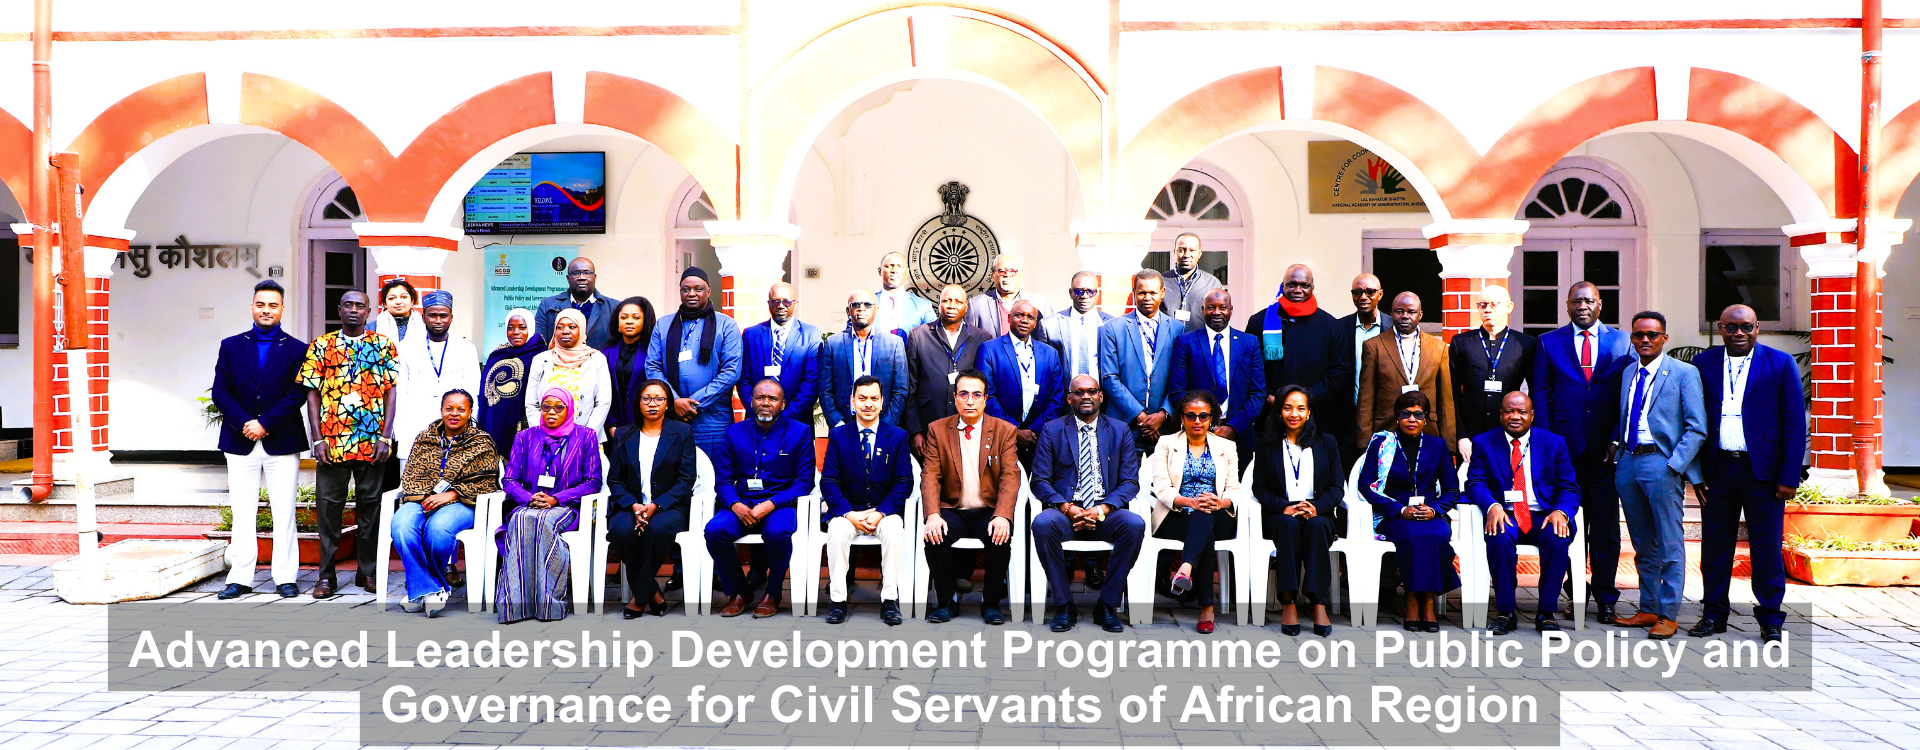 Advanced Leadership Development Programme on Public Policy and Governance for Civil Servants of African Region